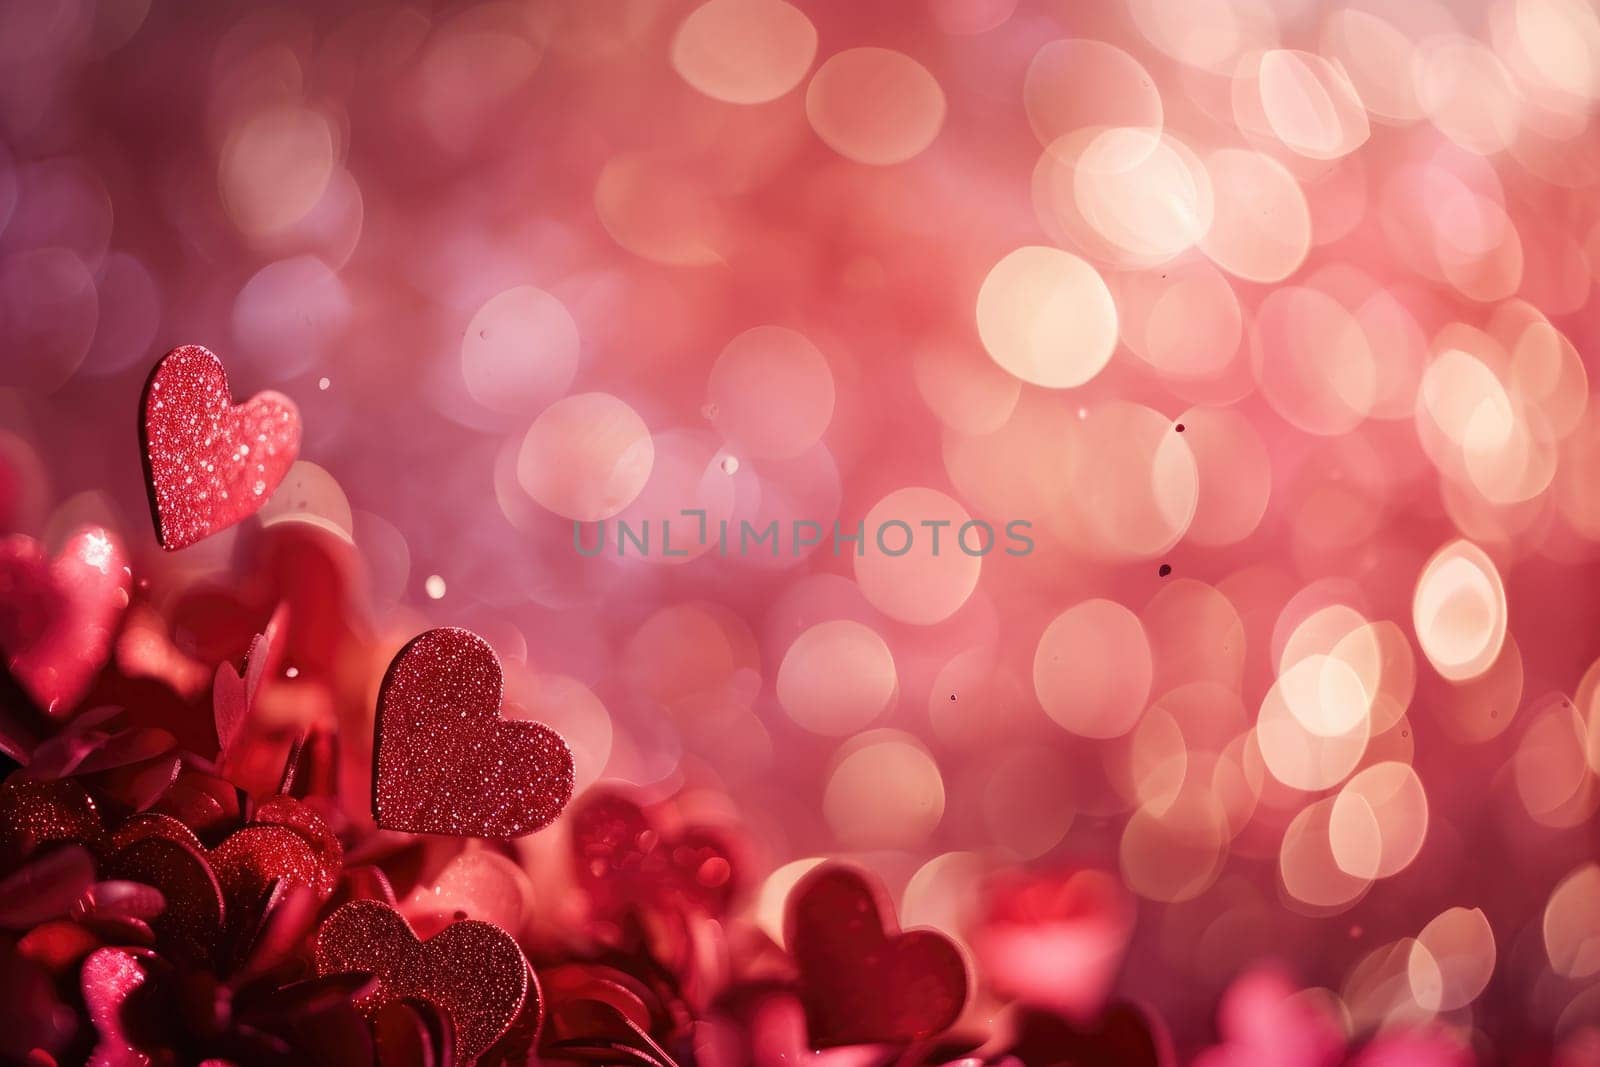 a romantic Valentine's Day background with a blend of soft pink and heart shaped elements.